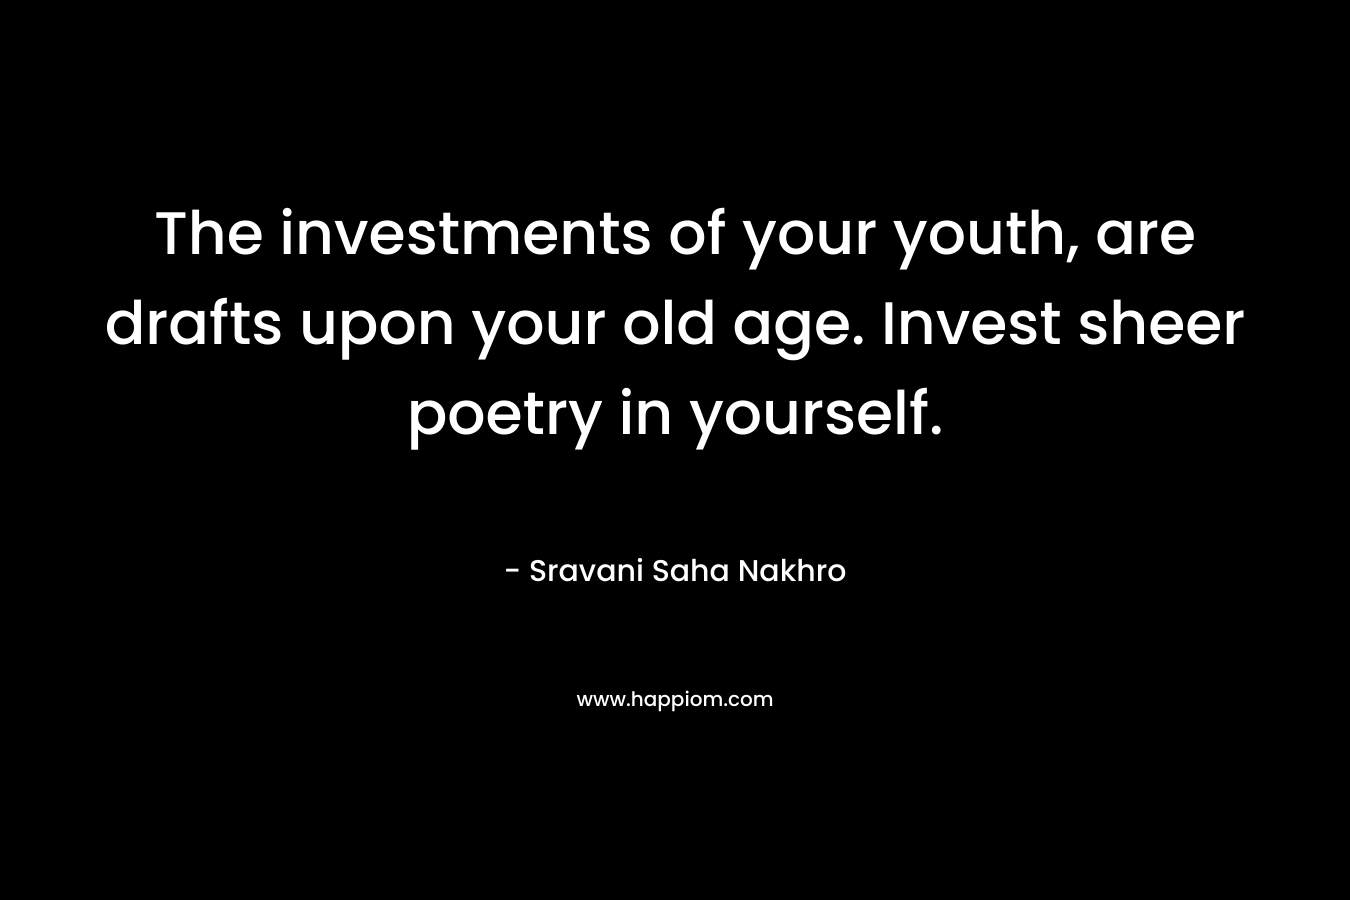 The investments of your youth, are drafts upon your old age. Invest sheer poetry in yourself.